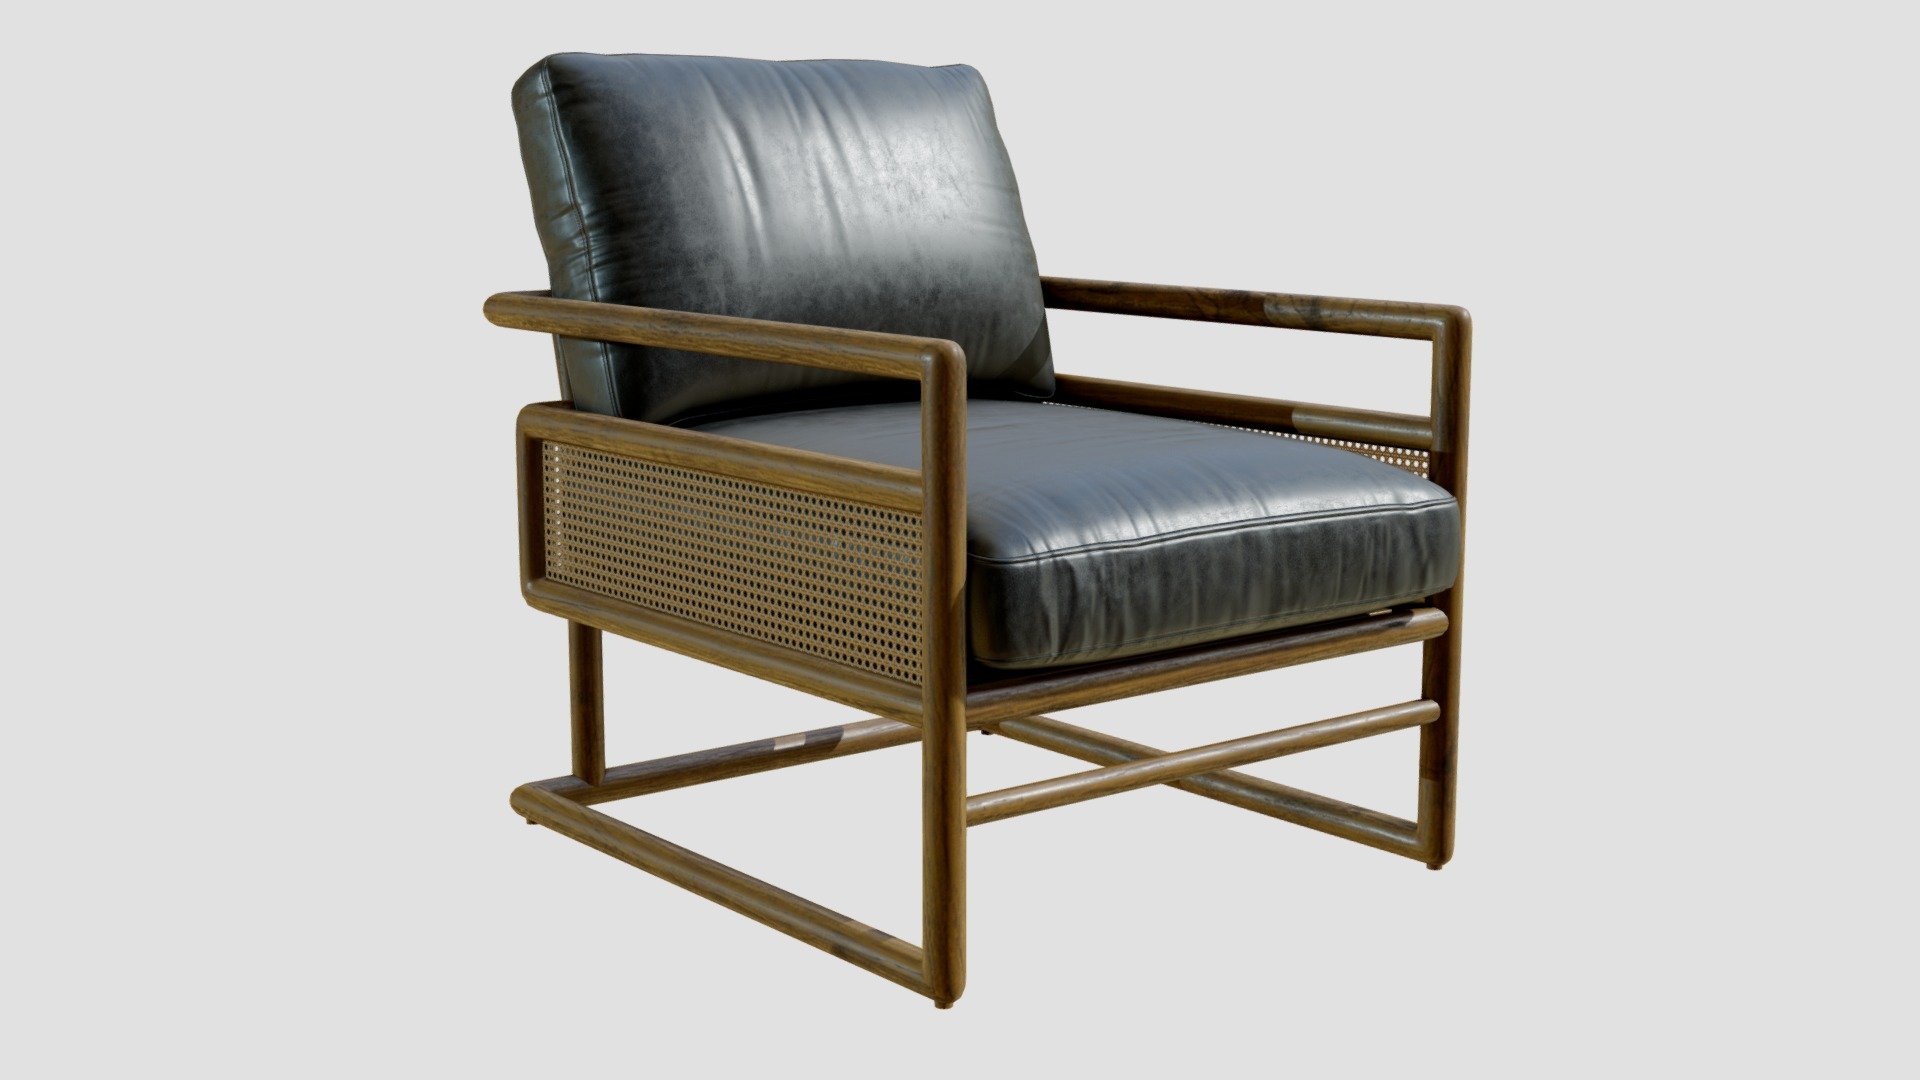 High-quality 3d model of a Crate and Barrel Carlin Antique Black Leather and Cane Accent Chair

Original: https://www.crateandbarrel.com/carlin-antique-black-leather-and-cane-accent-chair/s538037

7715 polygons
7928 vertices - Crate&Barrel Carlin Armchair - Buy Royalty Free 3D model by 3detto 3d model